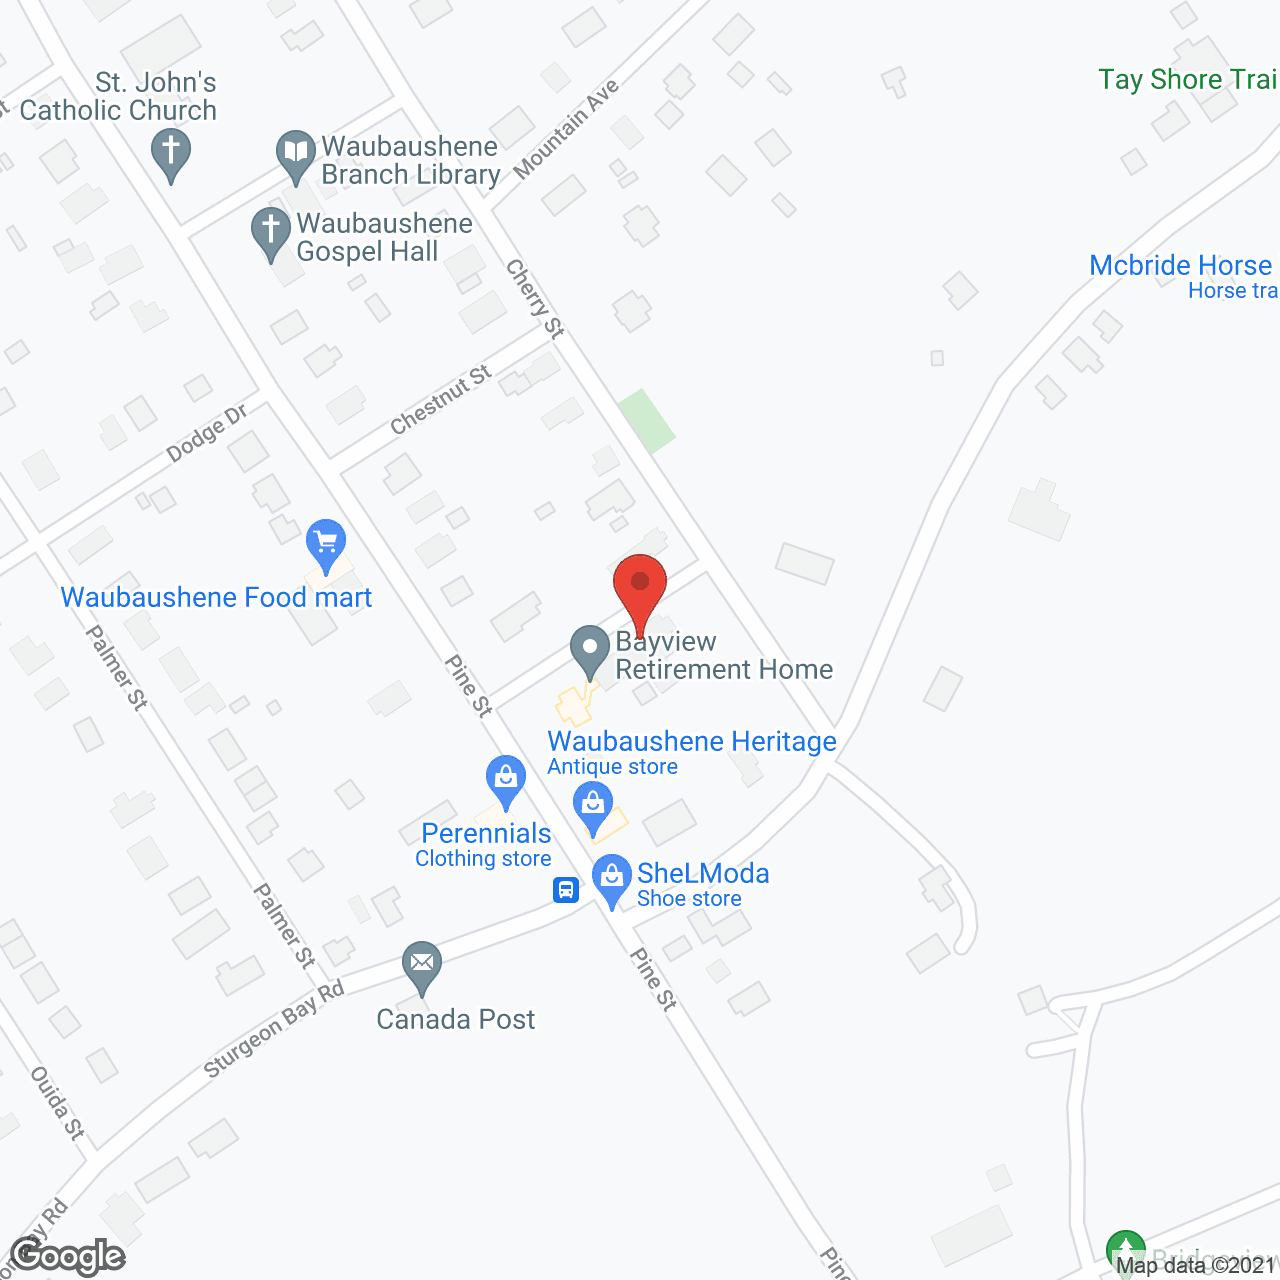 Bayview Retirement Home in google map